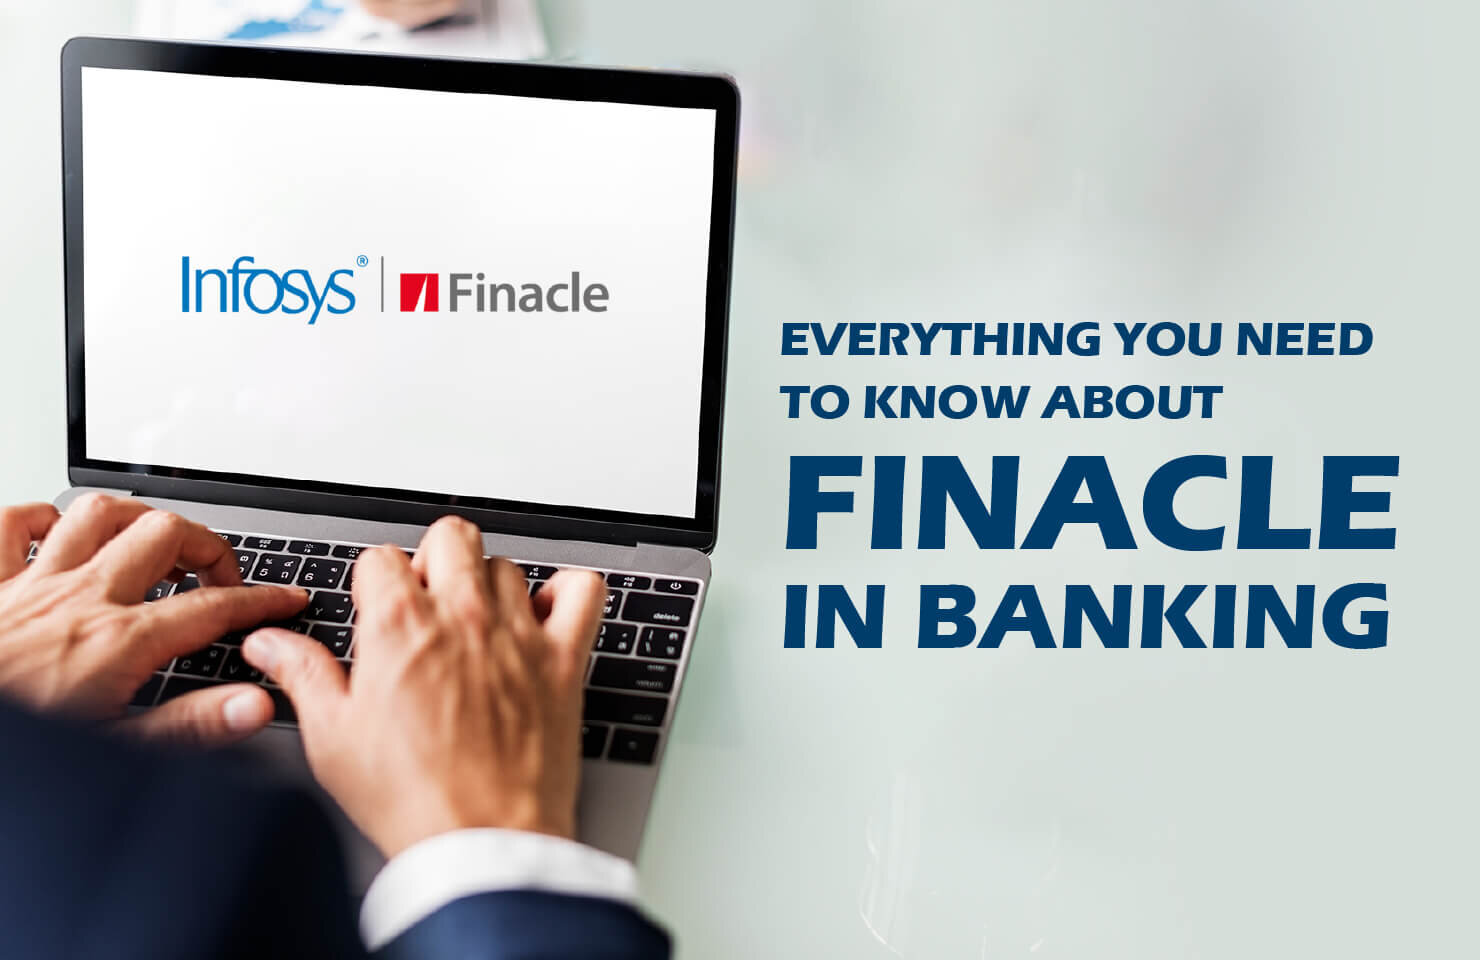 Everything you need to know about Finacle in Banking